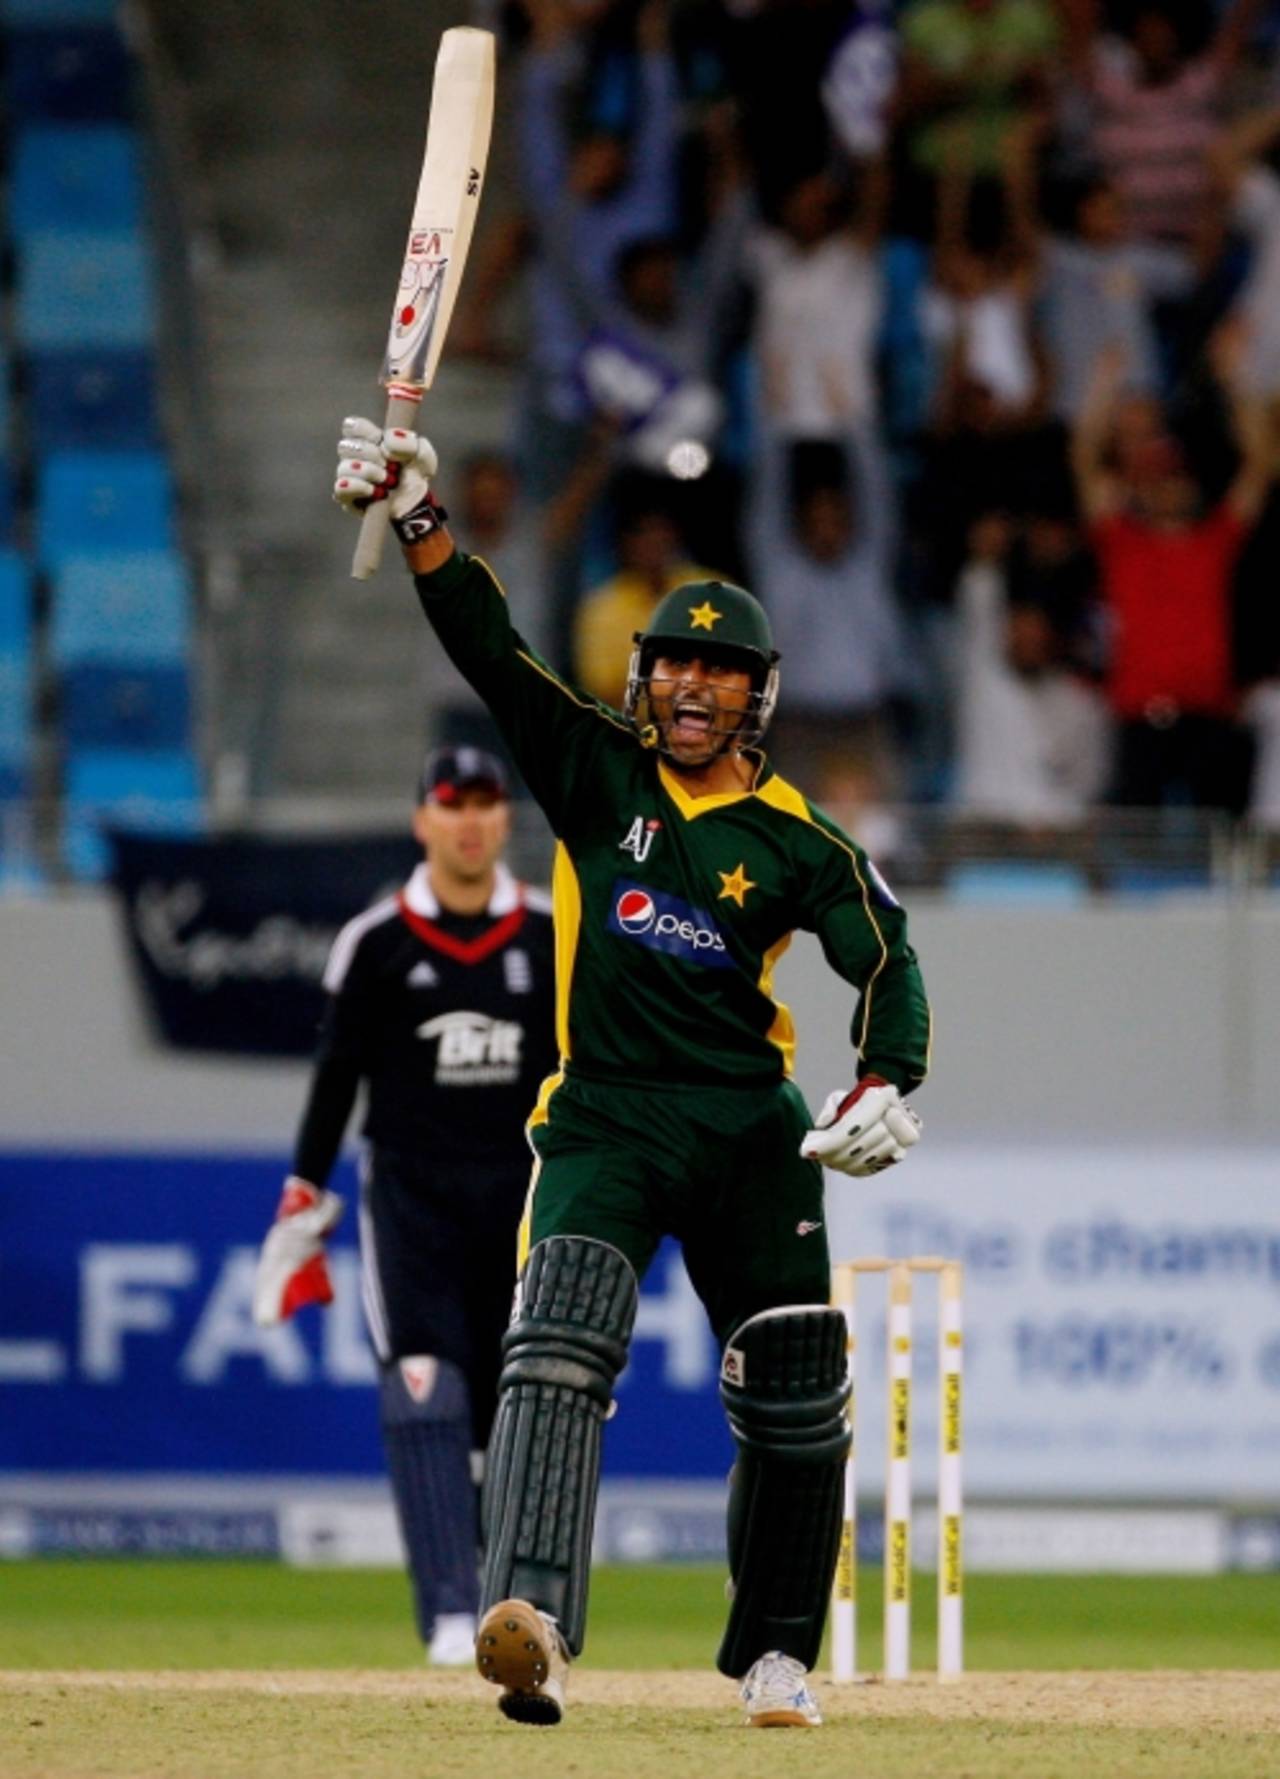 Abdul Razzaq's delight was evident after his explosive innings sealed a cathartic victory for Pakistan, England v Pakistan, 2nd Twenty20, Dubai, February 20, 2010